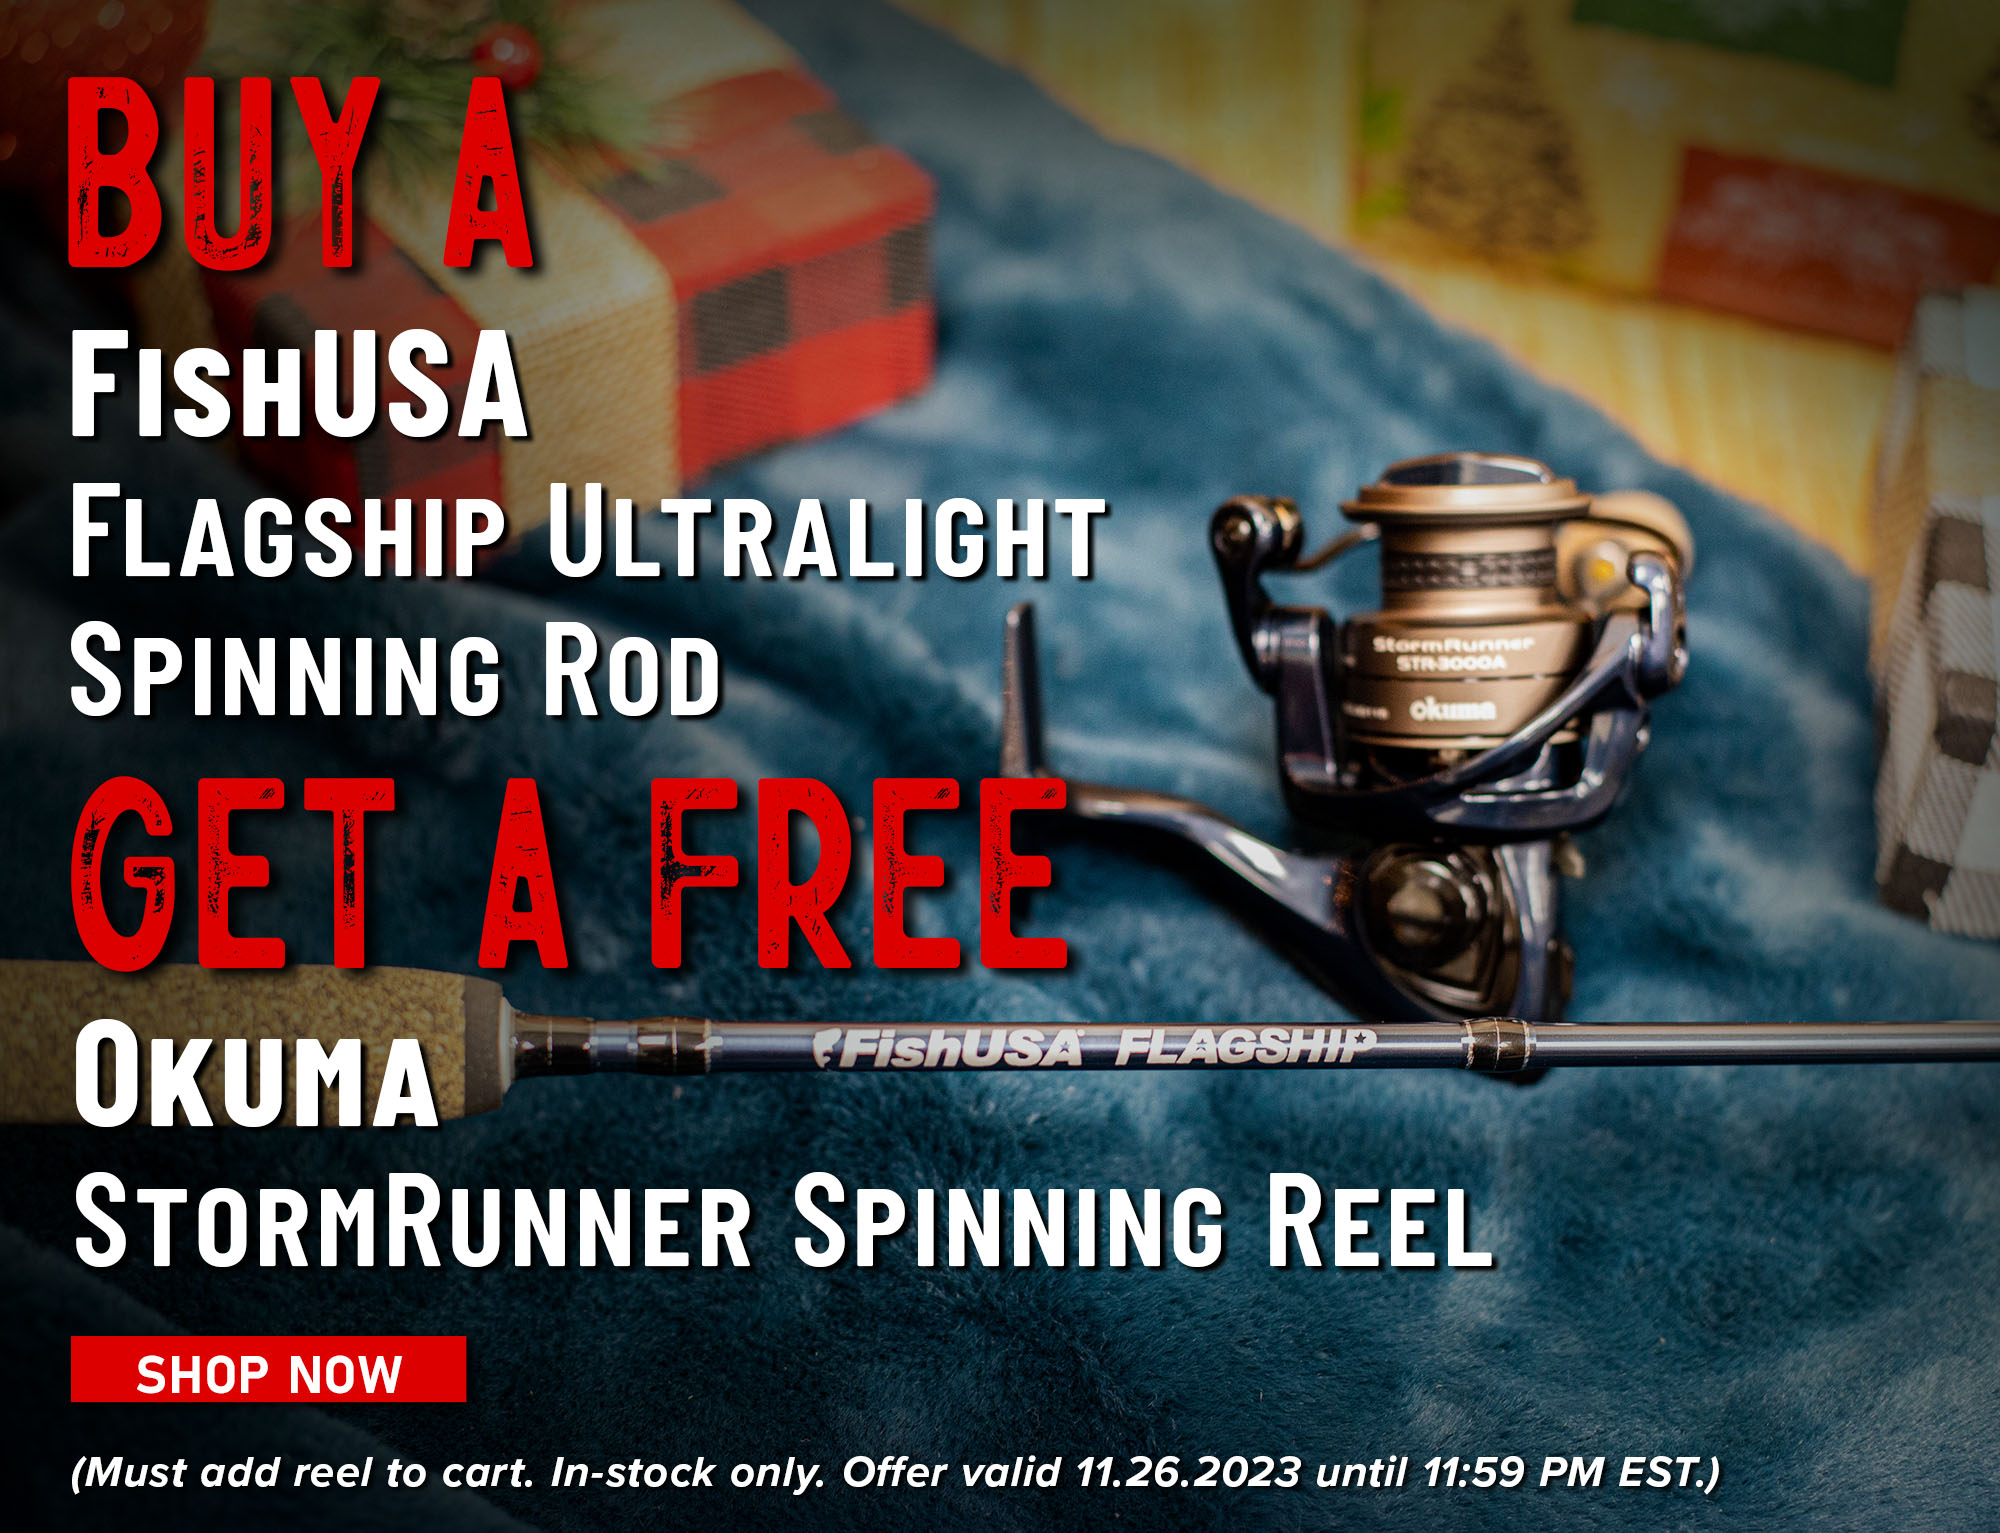 Buy A FishUSA Flagship Ultralight Spinning Rod Get a Free Okuma StormRunner Spinning Reel Shop Now (Must add reel to cart. In-stock only. Offer valid 11.26.2023 until 11:59 PM EST.)